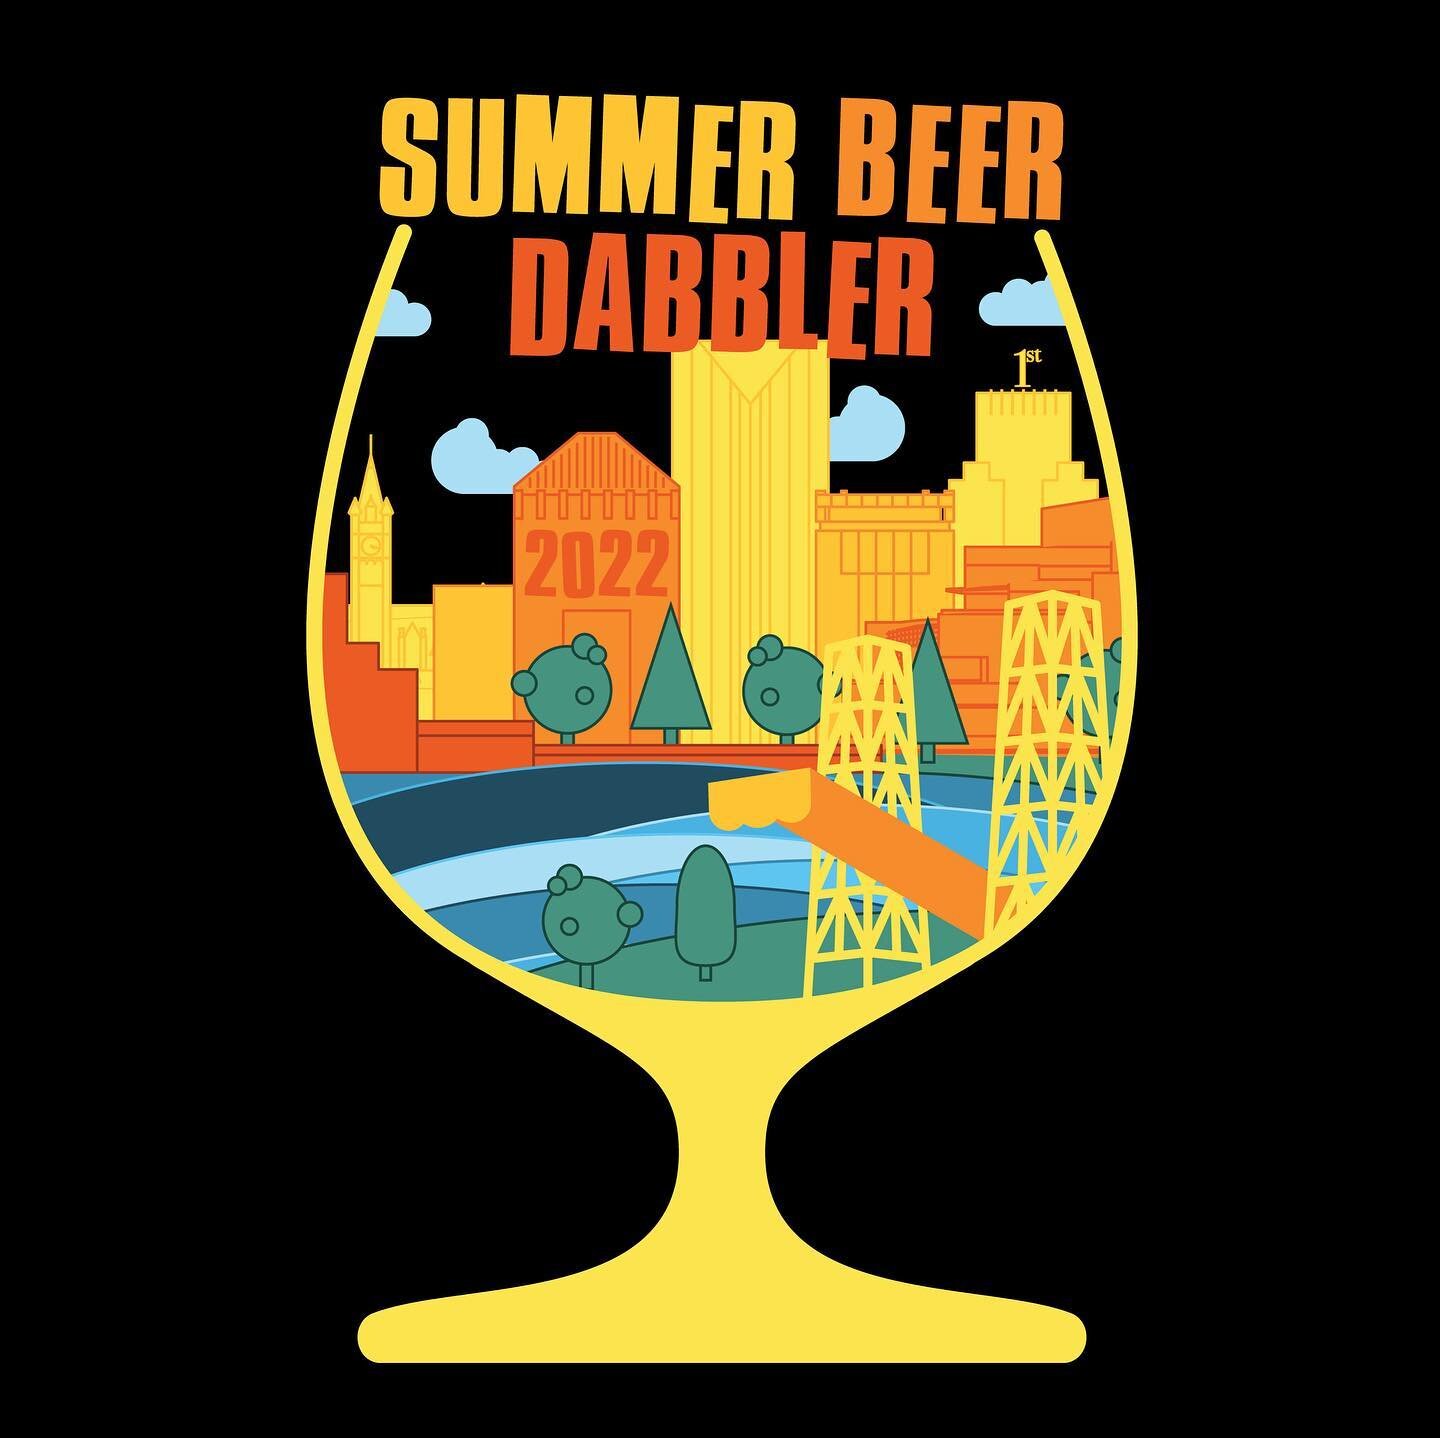 Yabba Dabbler Do!

We&rsquo;re making an appearance at the Summer Beer Dabbler this Friday and we&rsquo;ve got two tickets to give away to one lucky winner.

All you&rsquo;ve gotta do is tag the person you&rsquo;d bring along in the comments below an